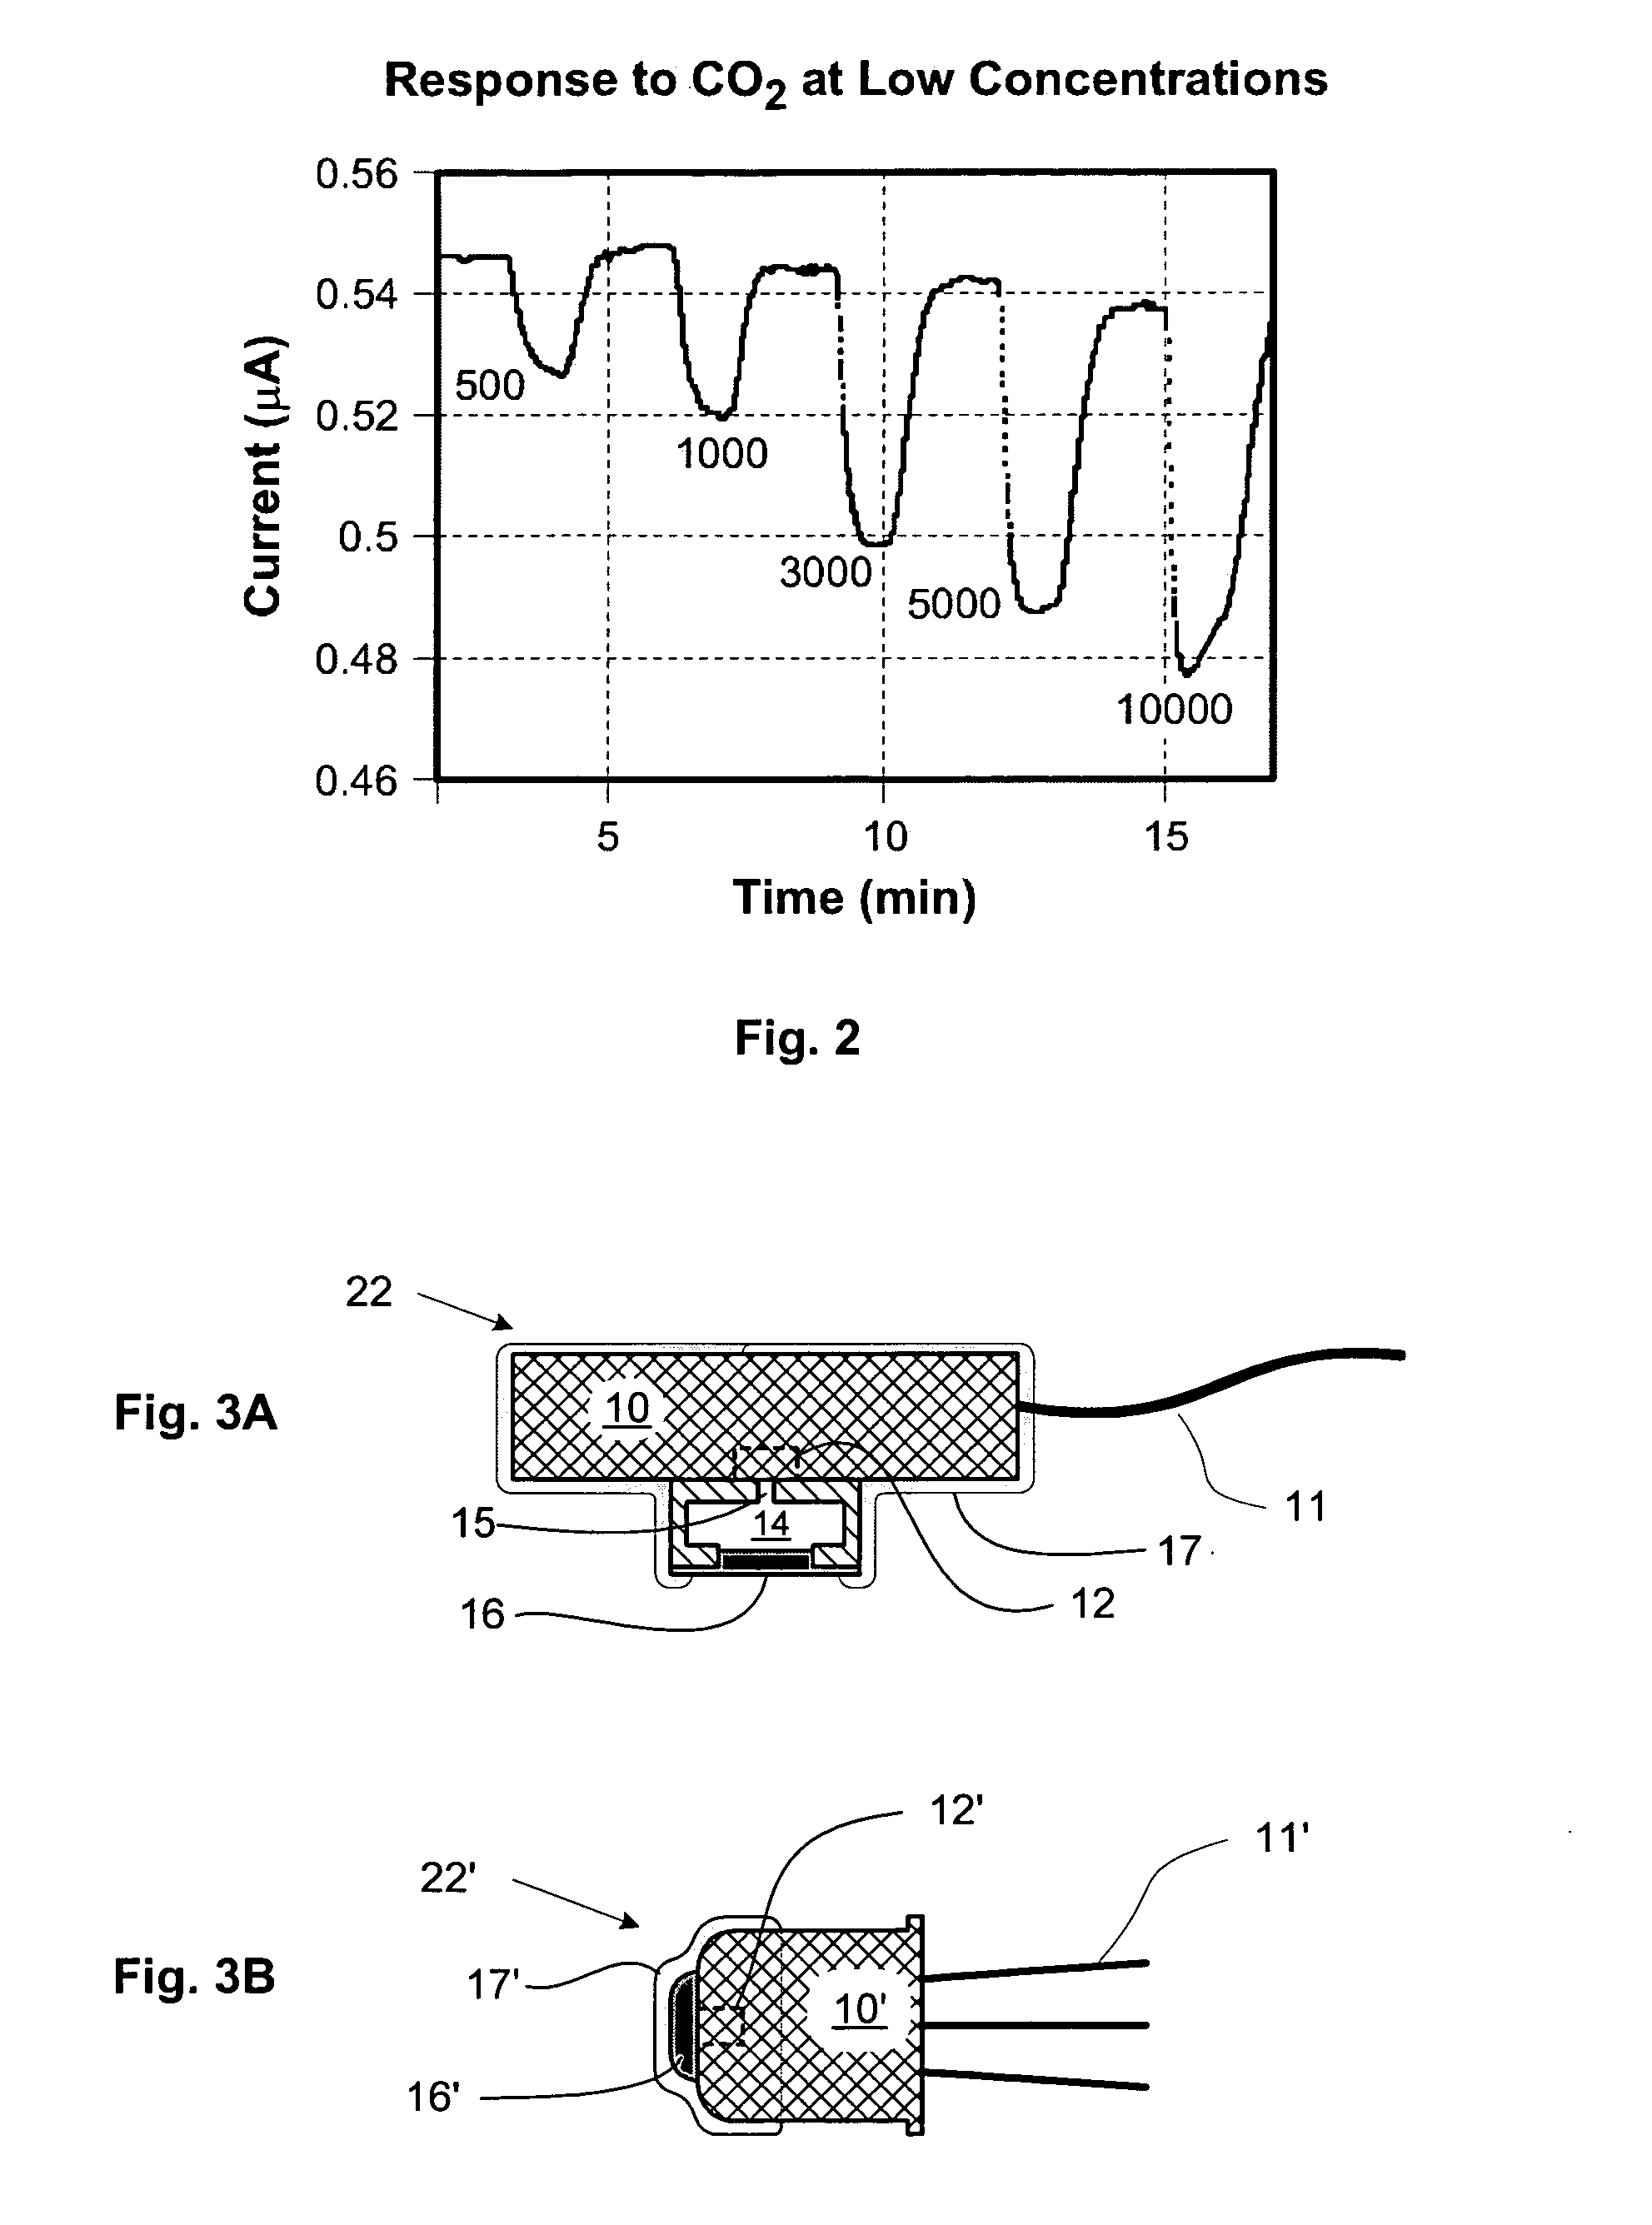 Nanoelectronic measurement system for physiologic gases and improved nanosensor for carbon dioxide